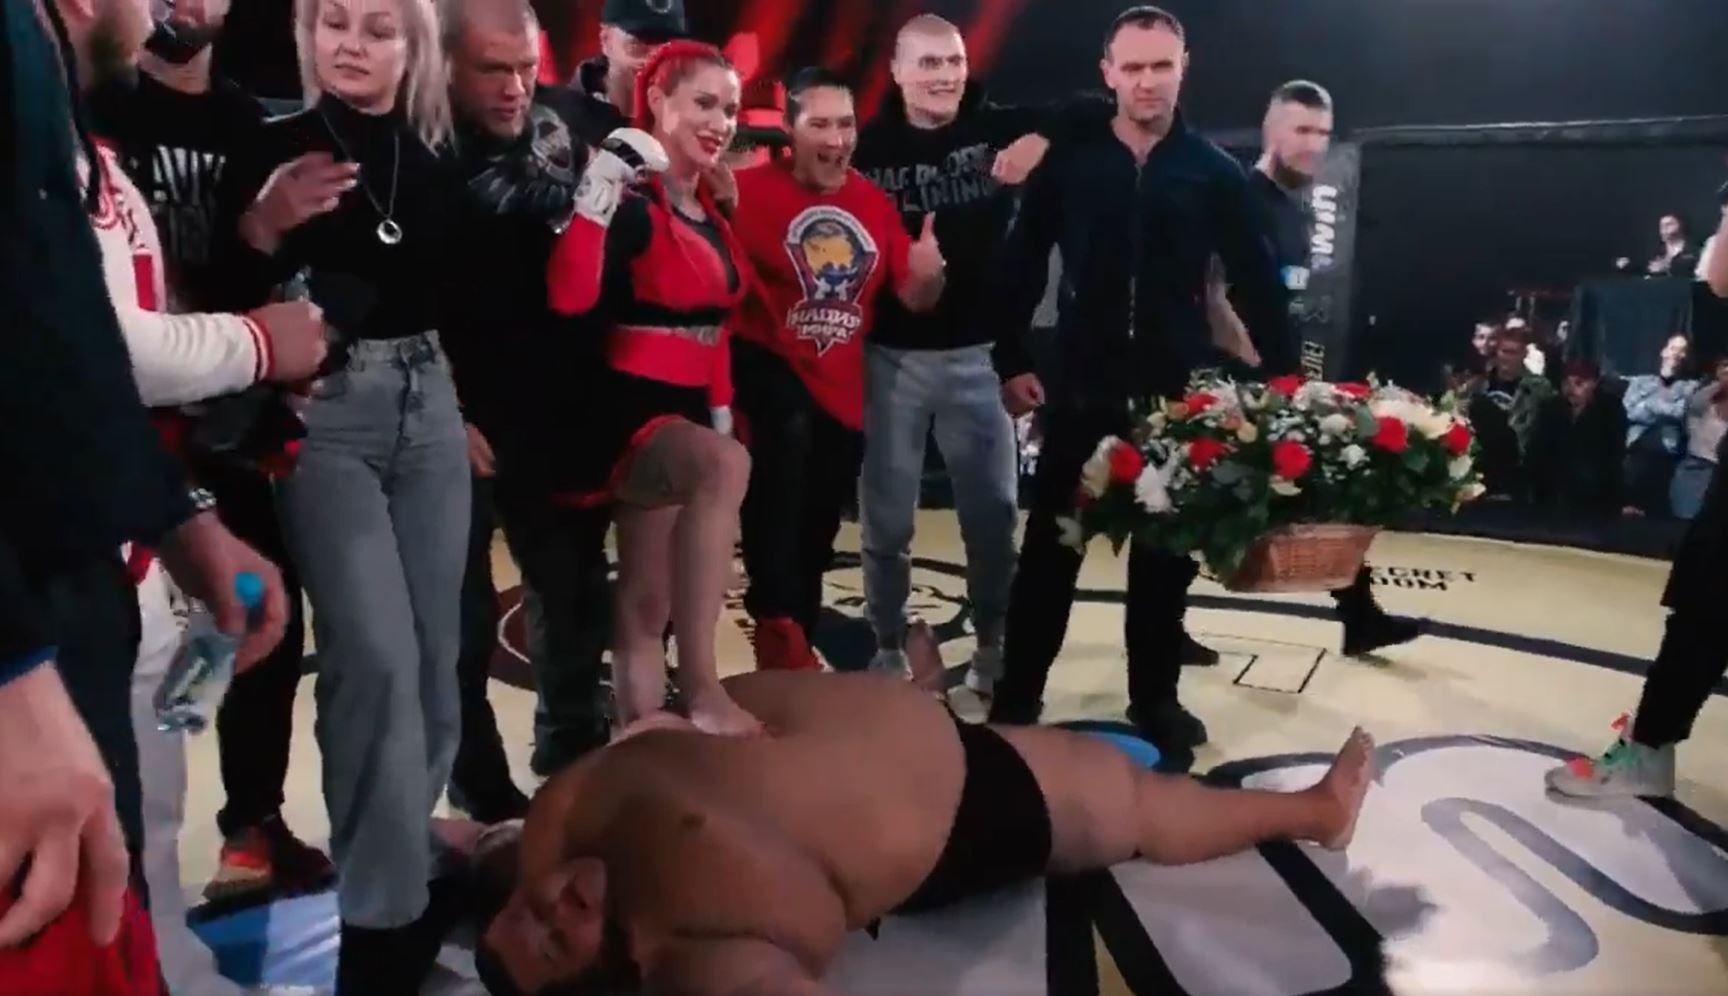 60kg female MMA fighter finishes 240kg YouTuber in Russia.